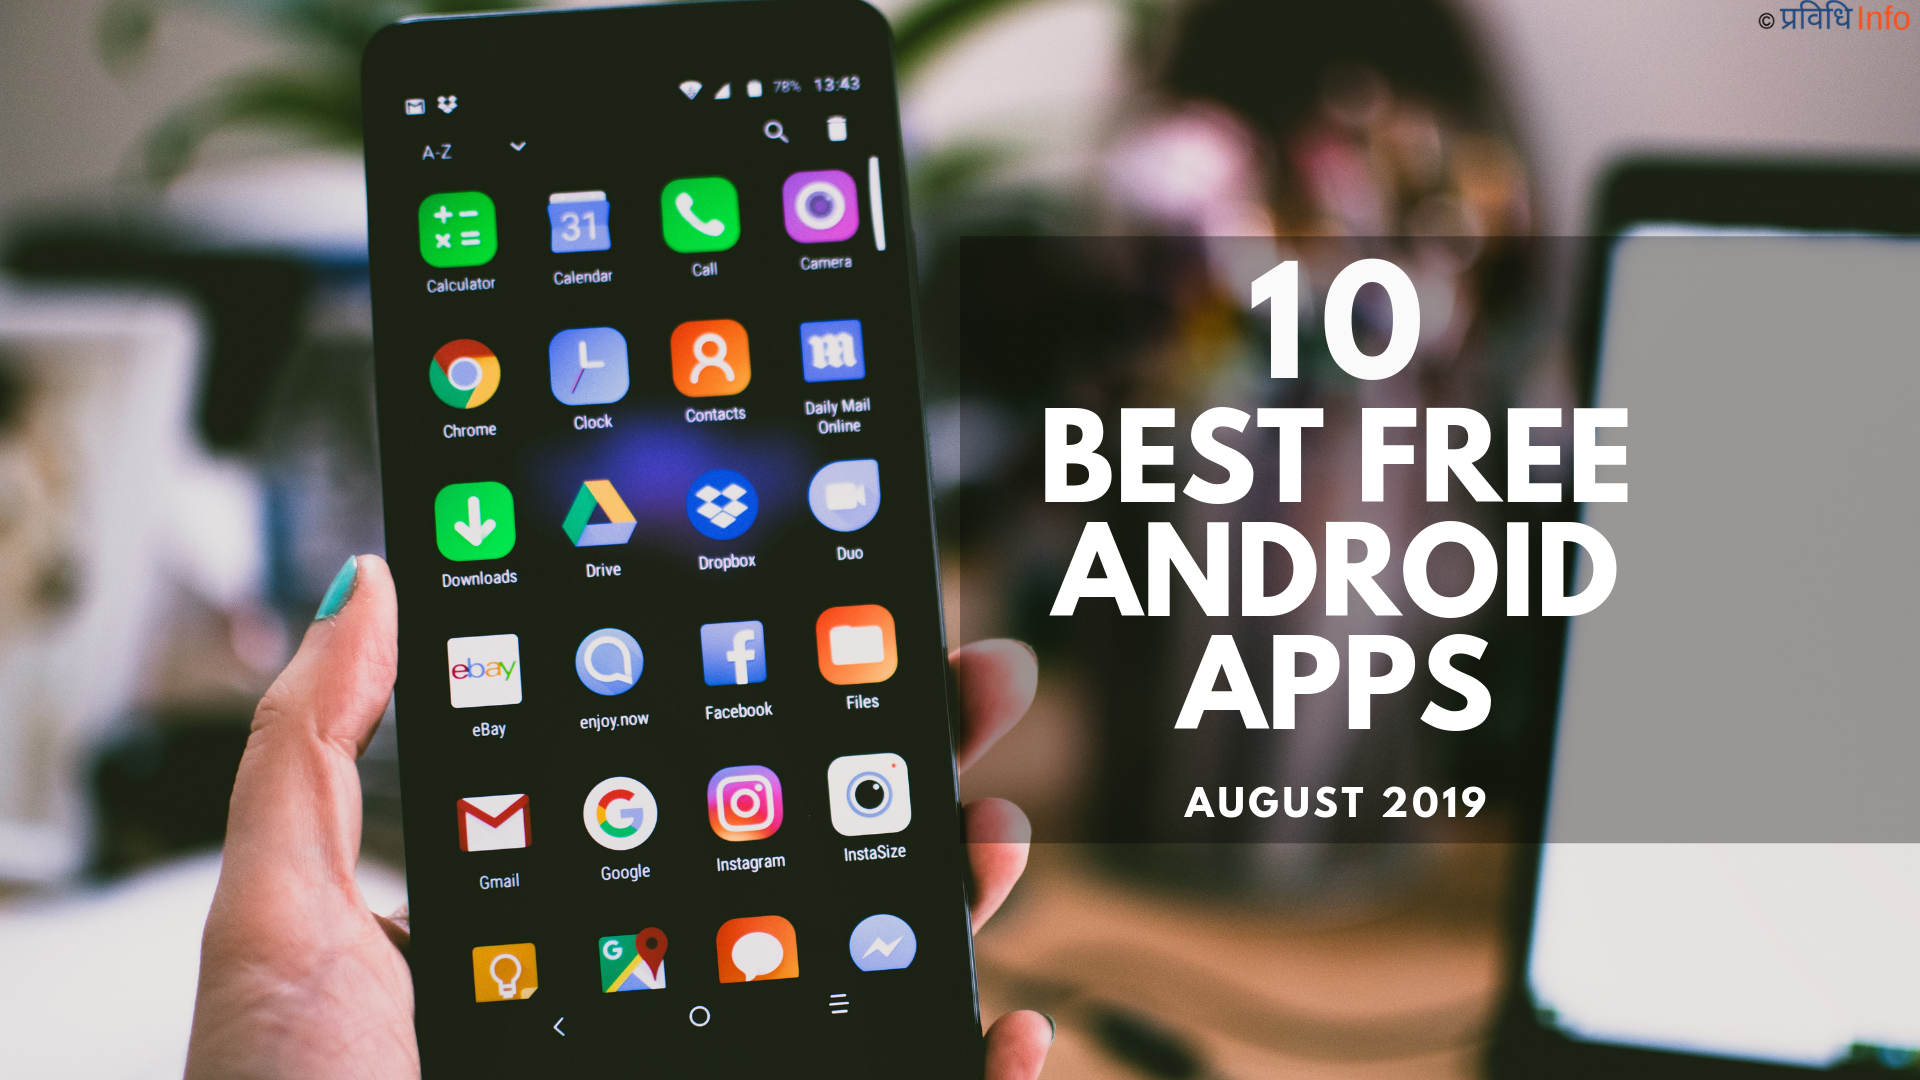 Top 10 Unique Free Android Apps – August 2019 - Prabidhi Info